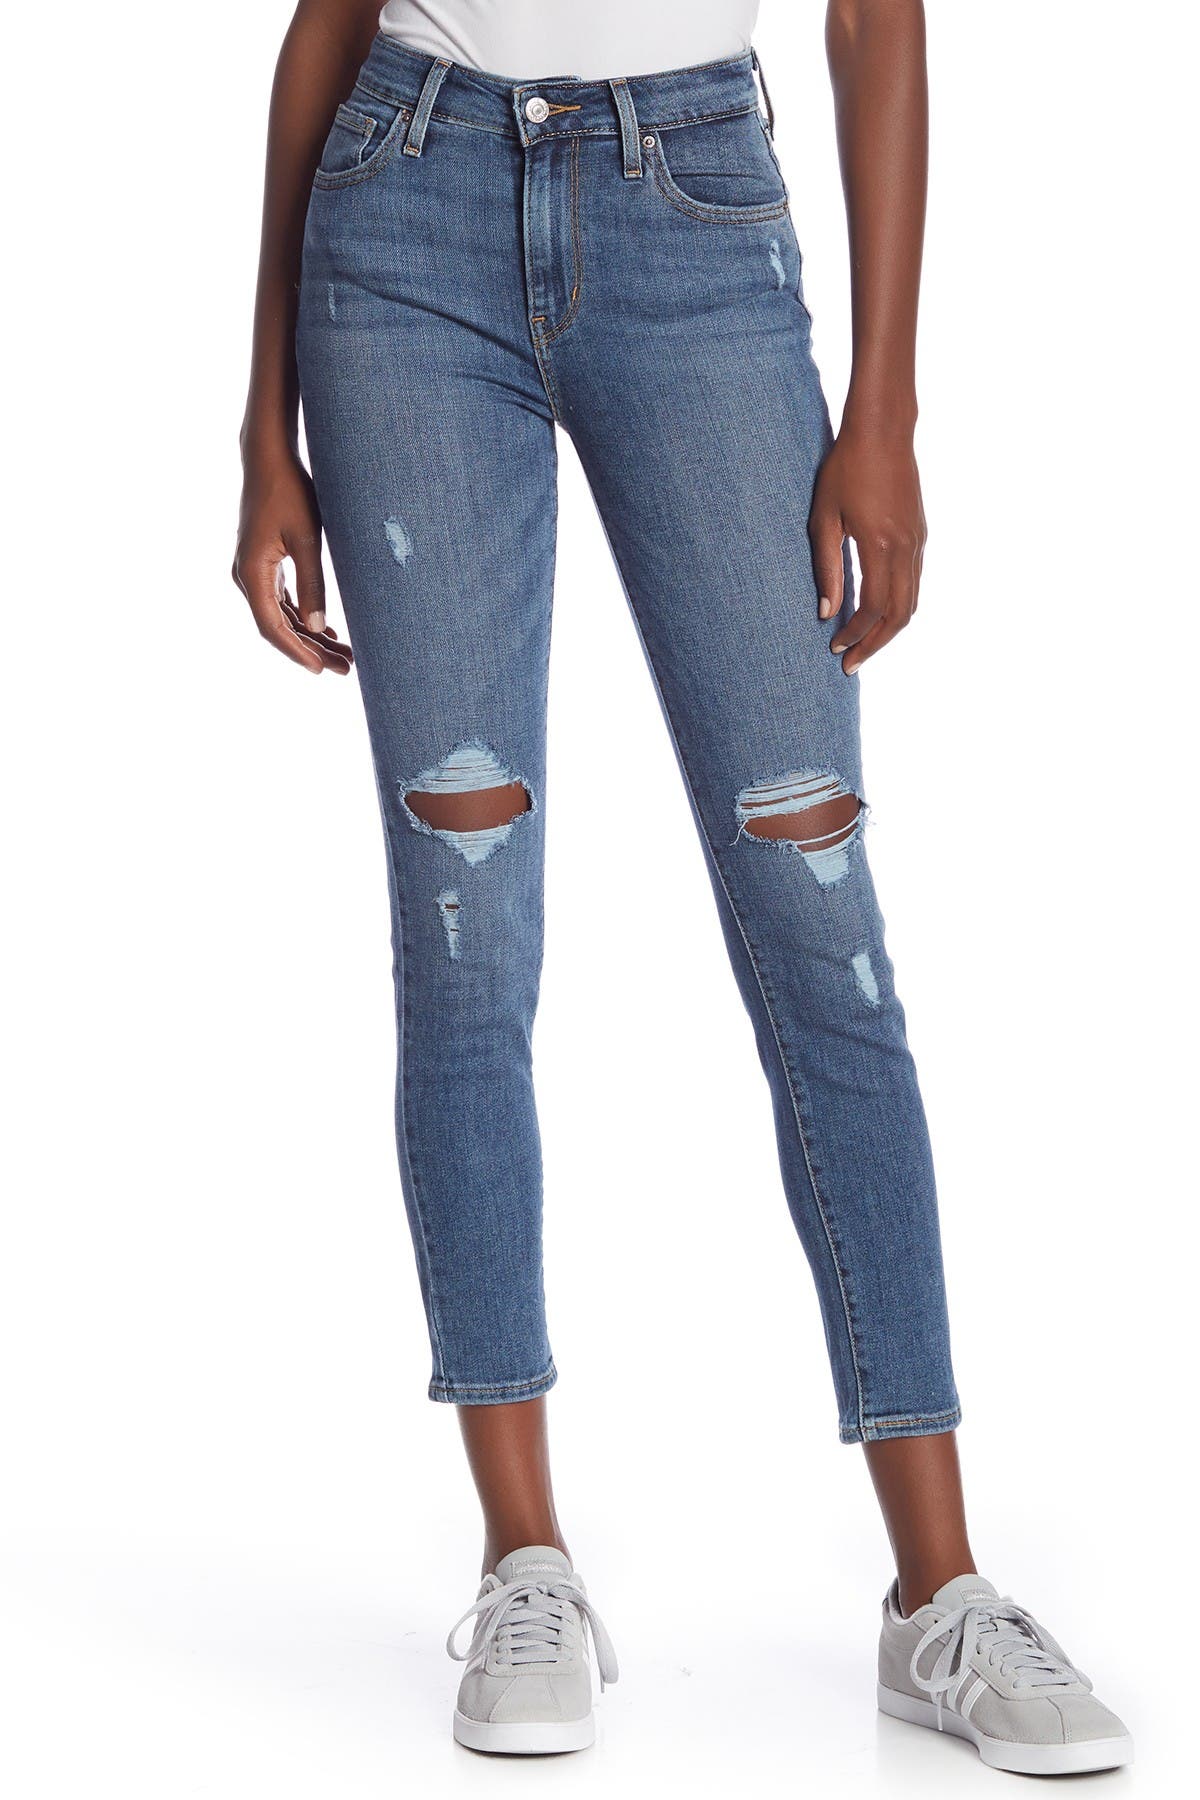 721 High Rise Distressed Skinny Jeans 